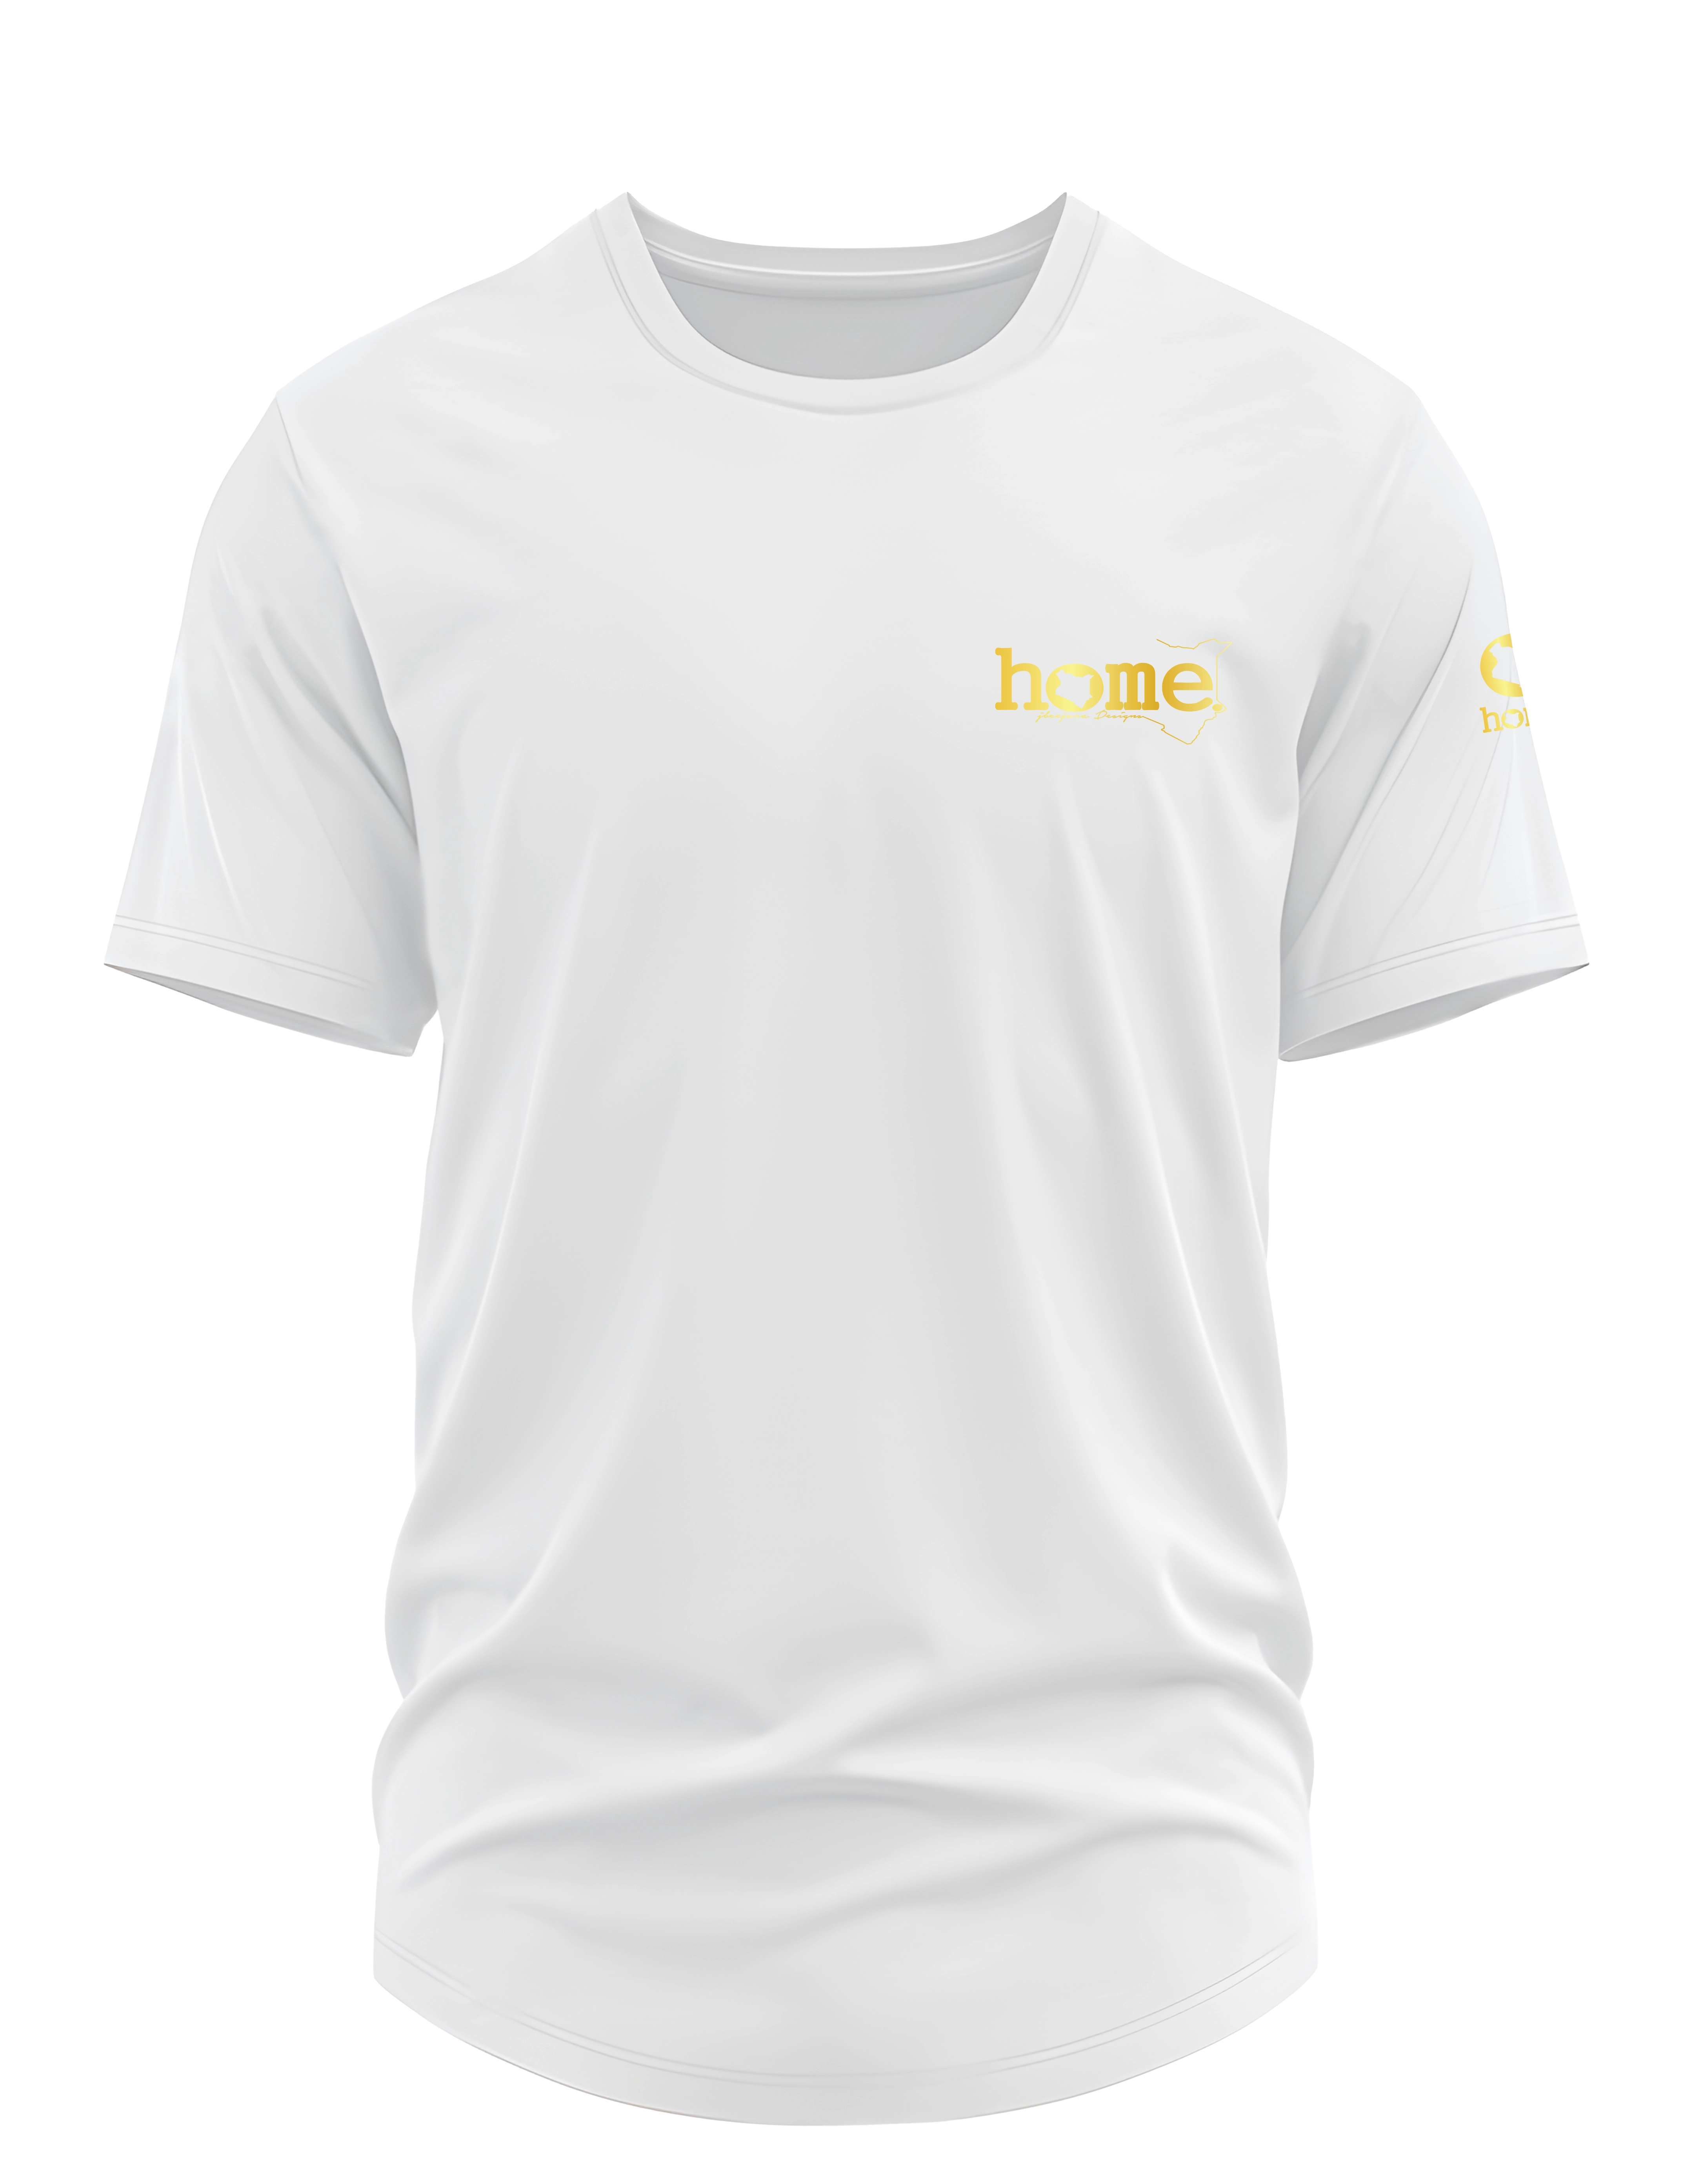 home_254 SHORT-SLEEVED WHITE CURVED HEM T-SHIRT WITH A GOLD TAG PRINT – CLASSIC MAN COLLECTION